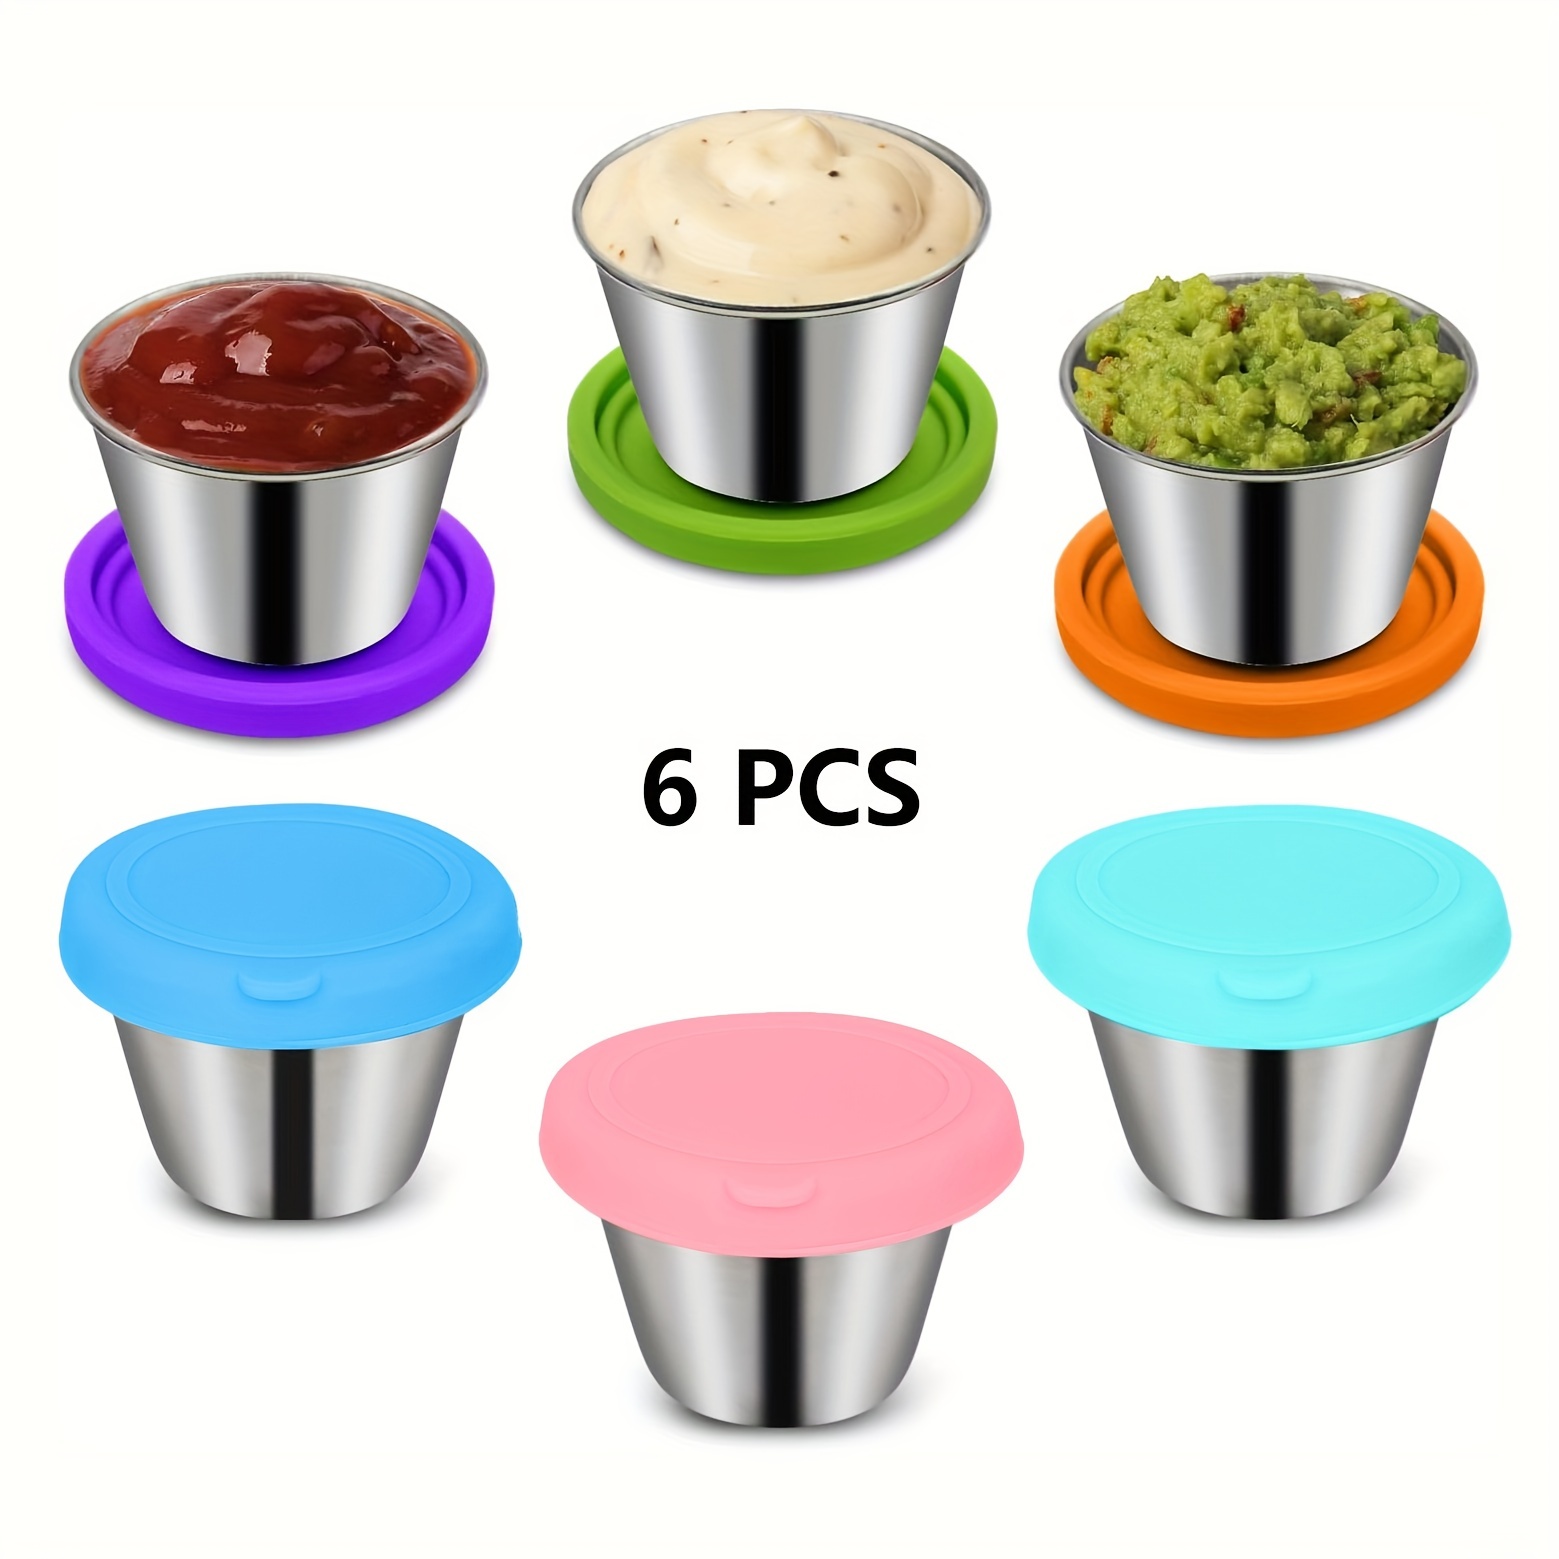 6pcs Salad Dressing Container, 1.7oz/50ml Leak-proof Stainless